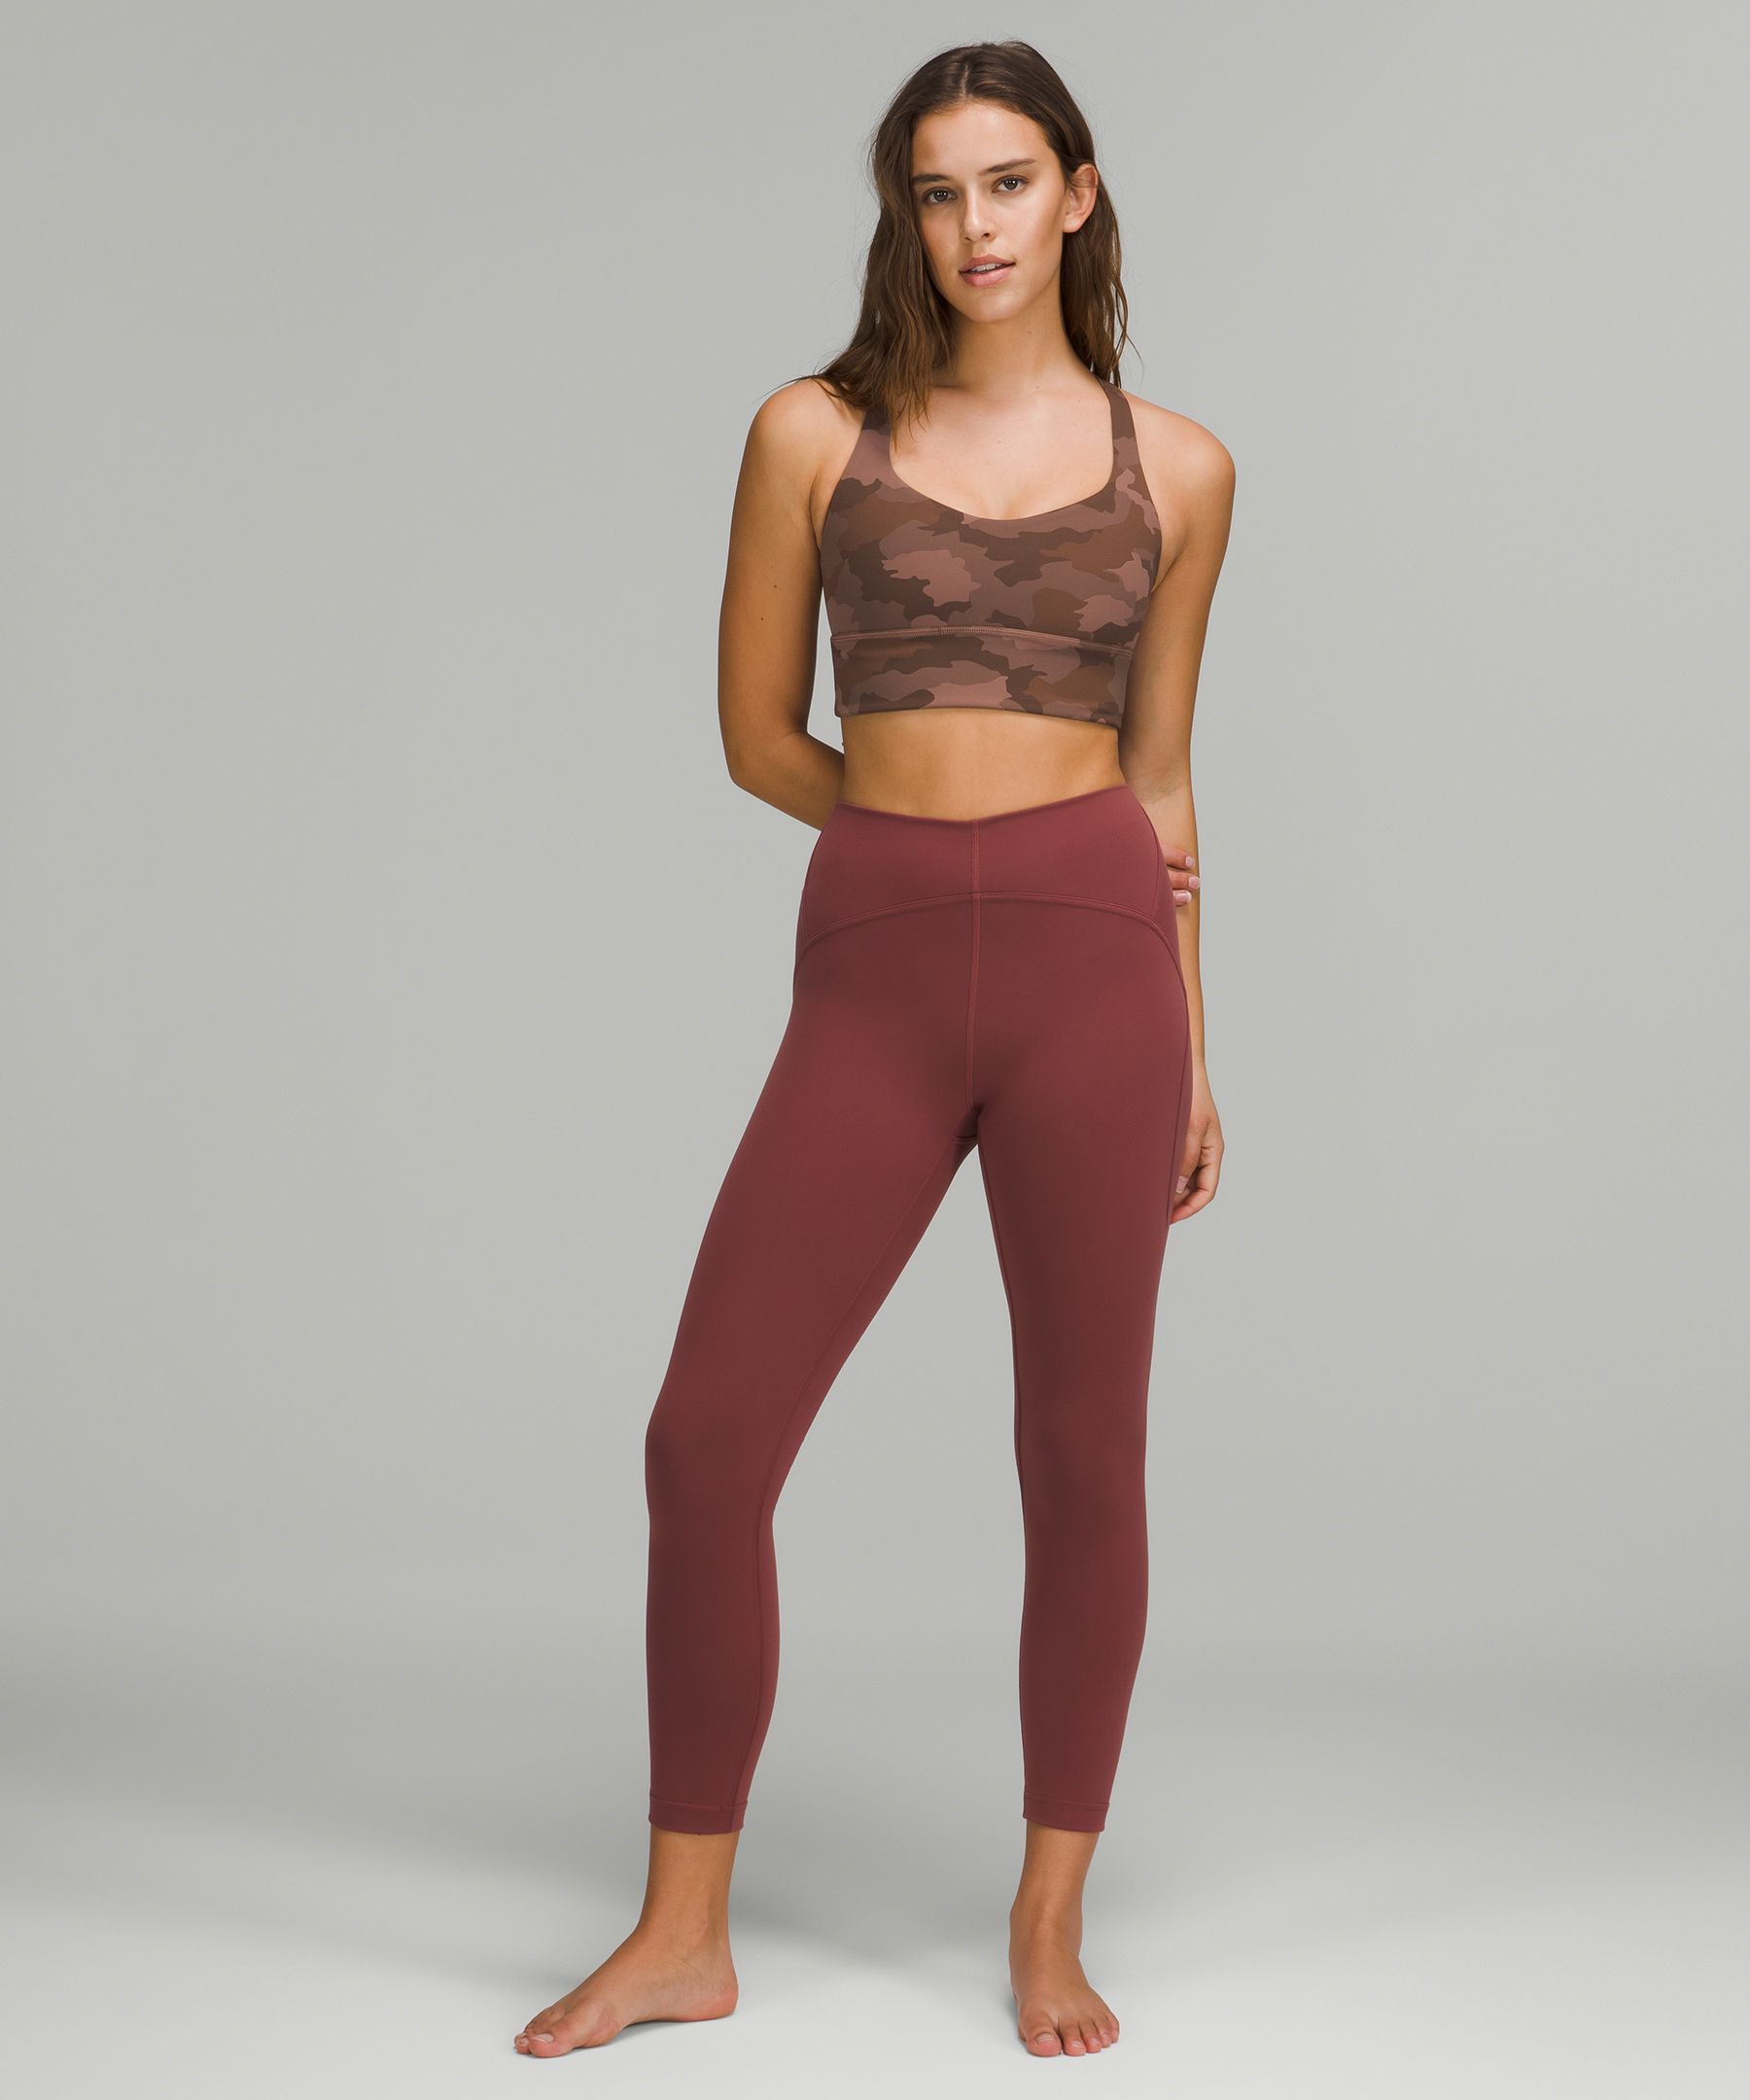 Lululemon - Free to Be Longline Bra - Wild *Light Support, A/B Cup